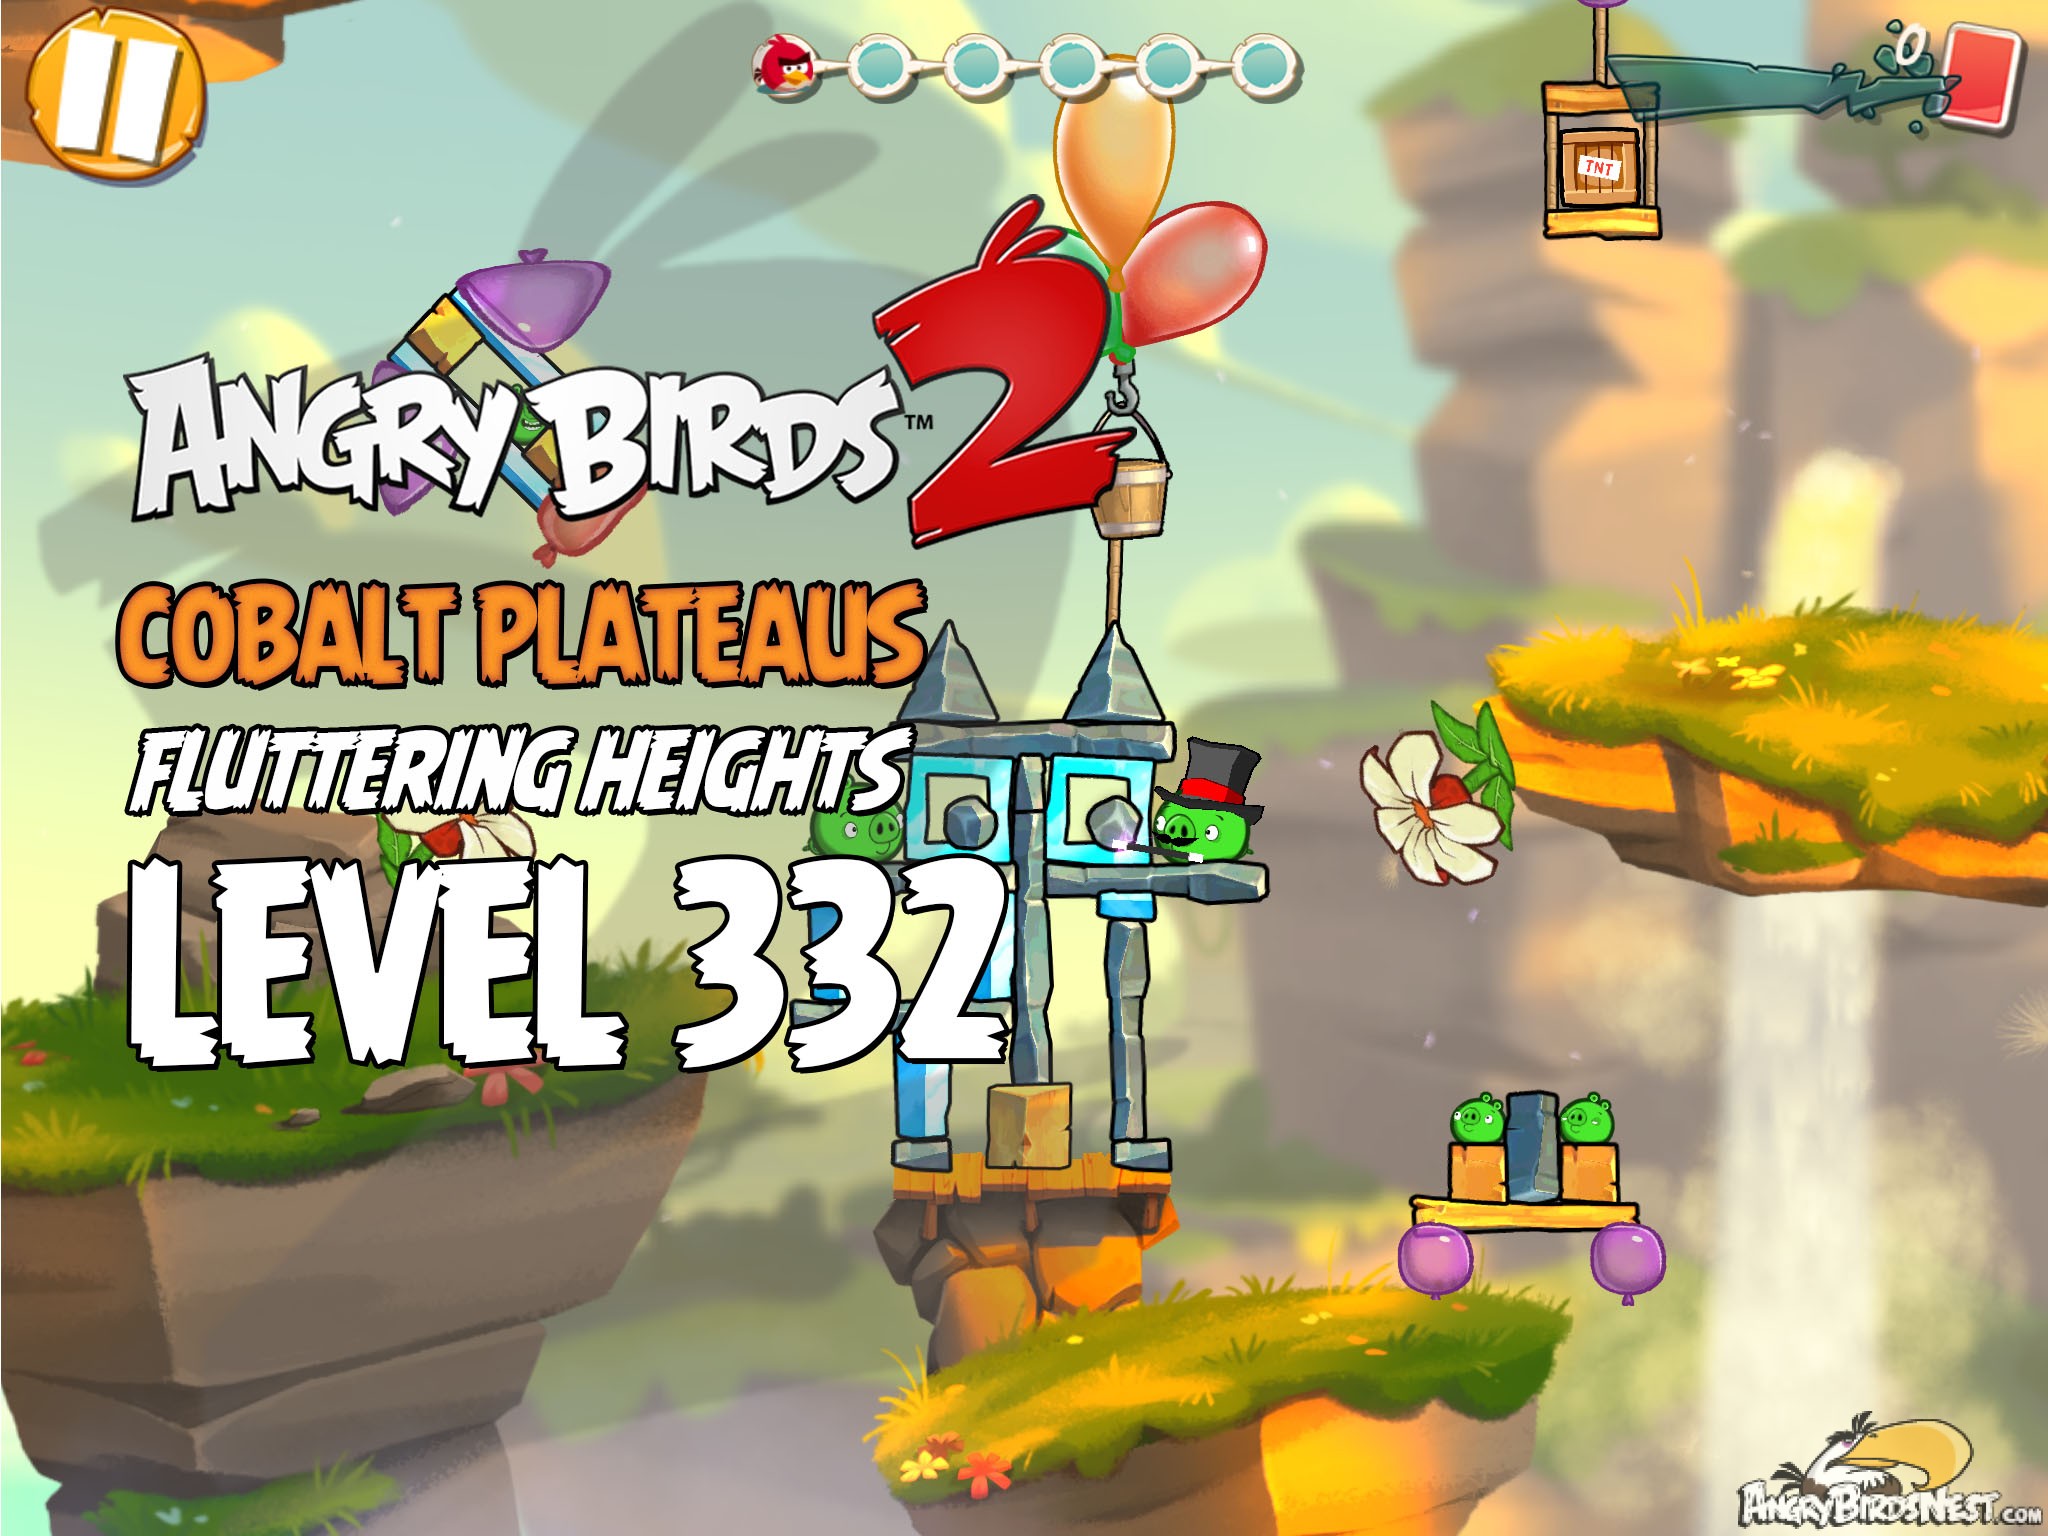 Angry Birds 2 Level 332 Cobalt Plateaus Fluttering Heights Image